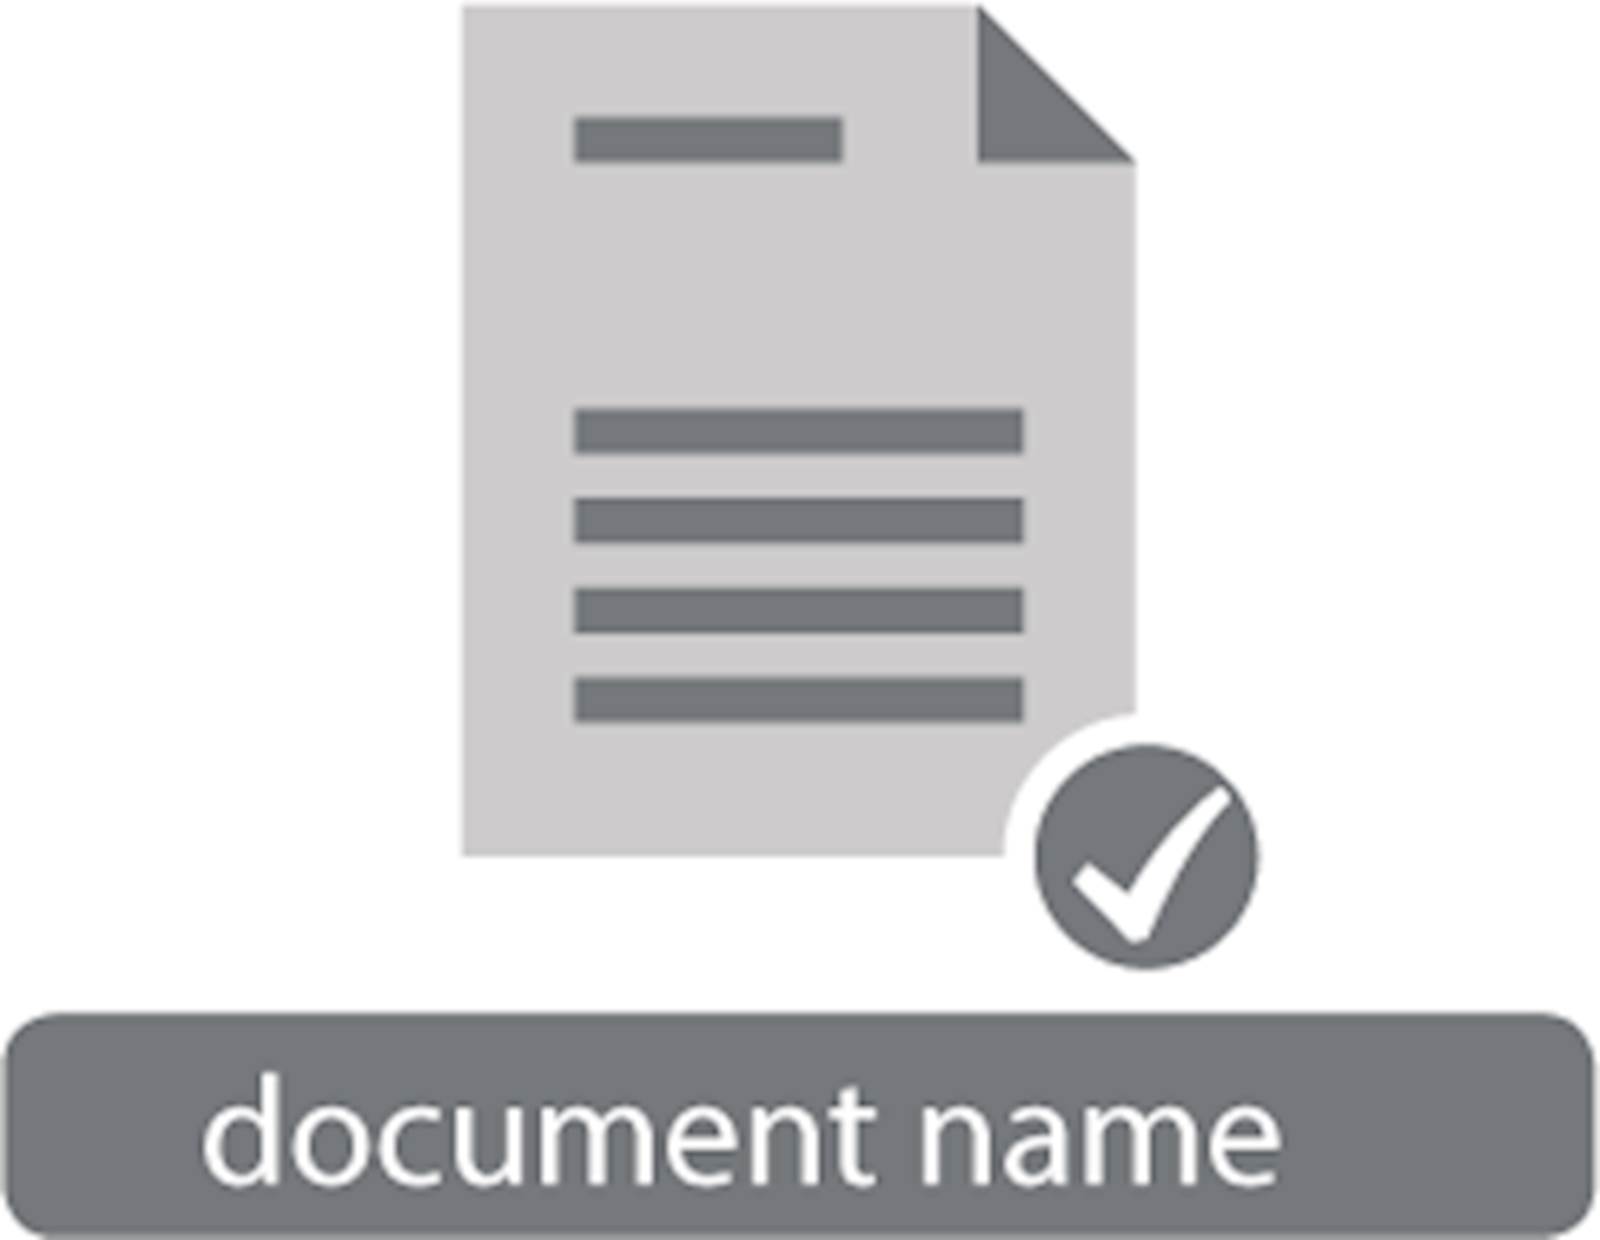 Drivve Image Name your document Graphic